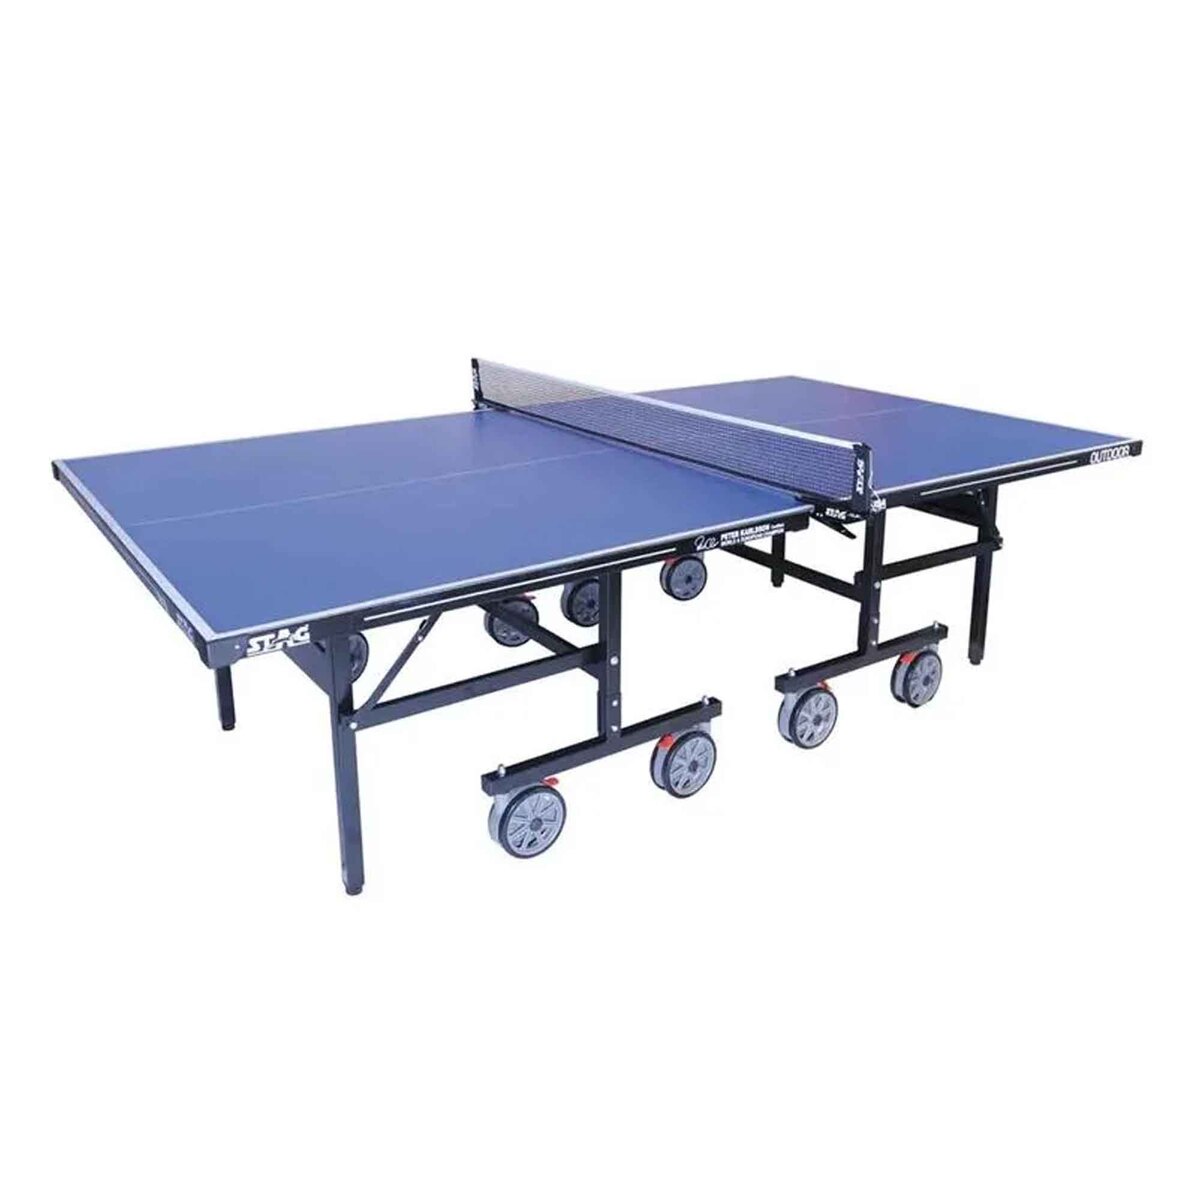 Stag Pacifica Outdoor Table Tennis Table, SG-PCIFIC